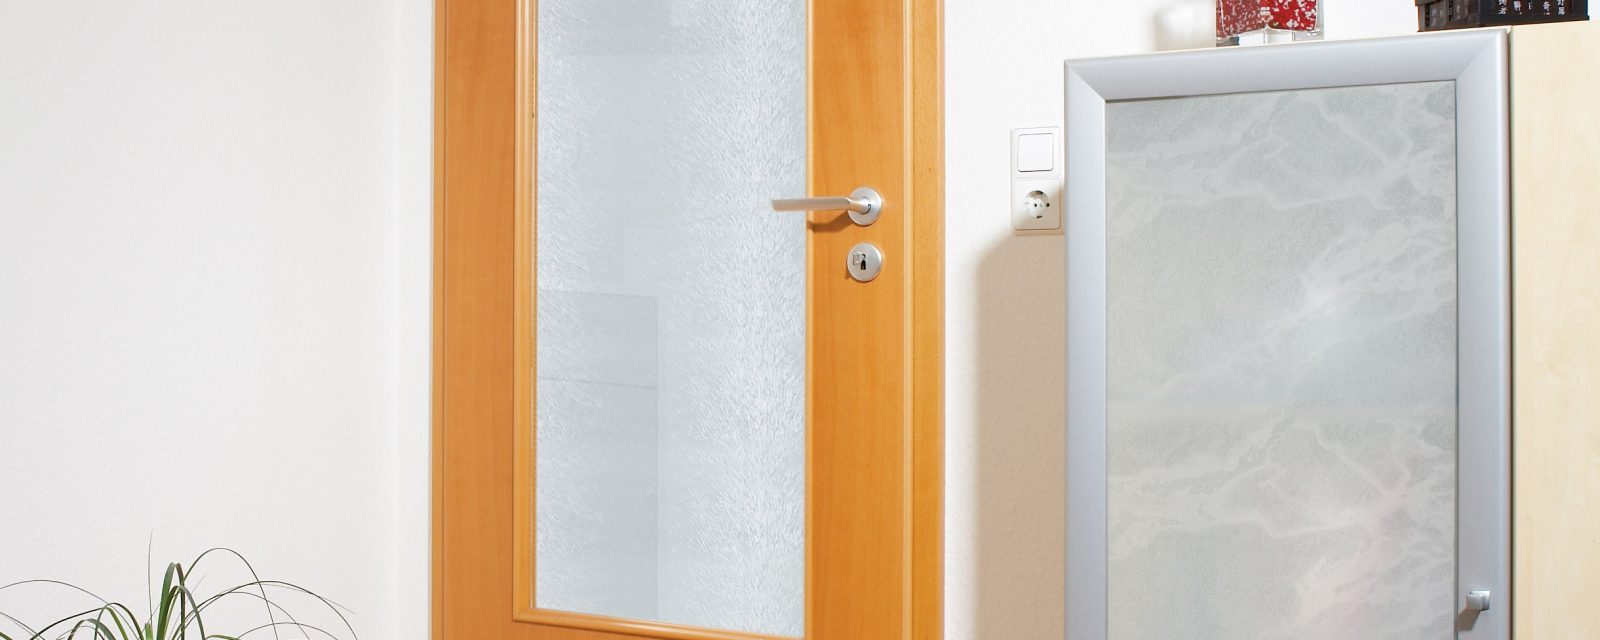 Cabinet door and door cut-out with polystyrene glass